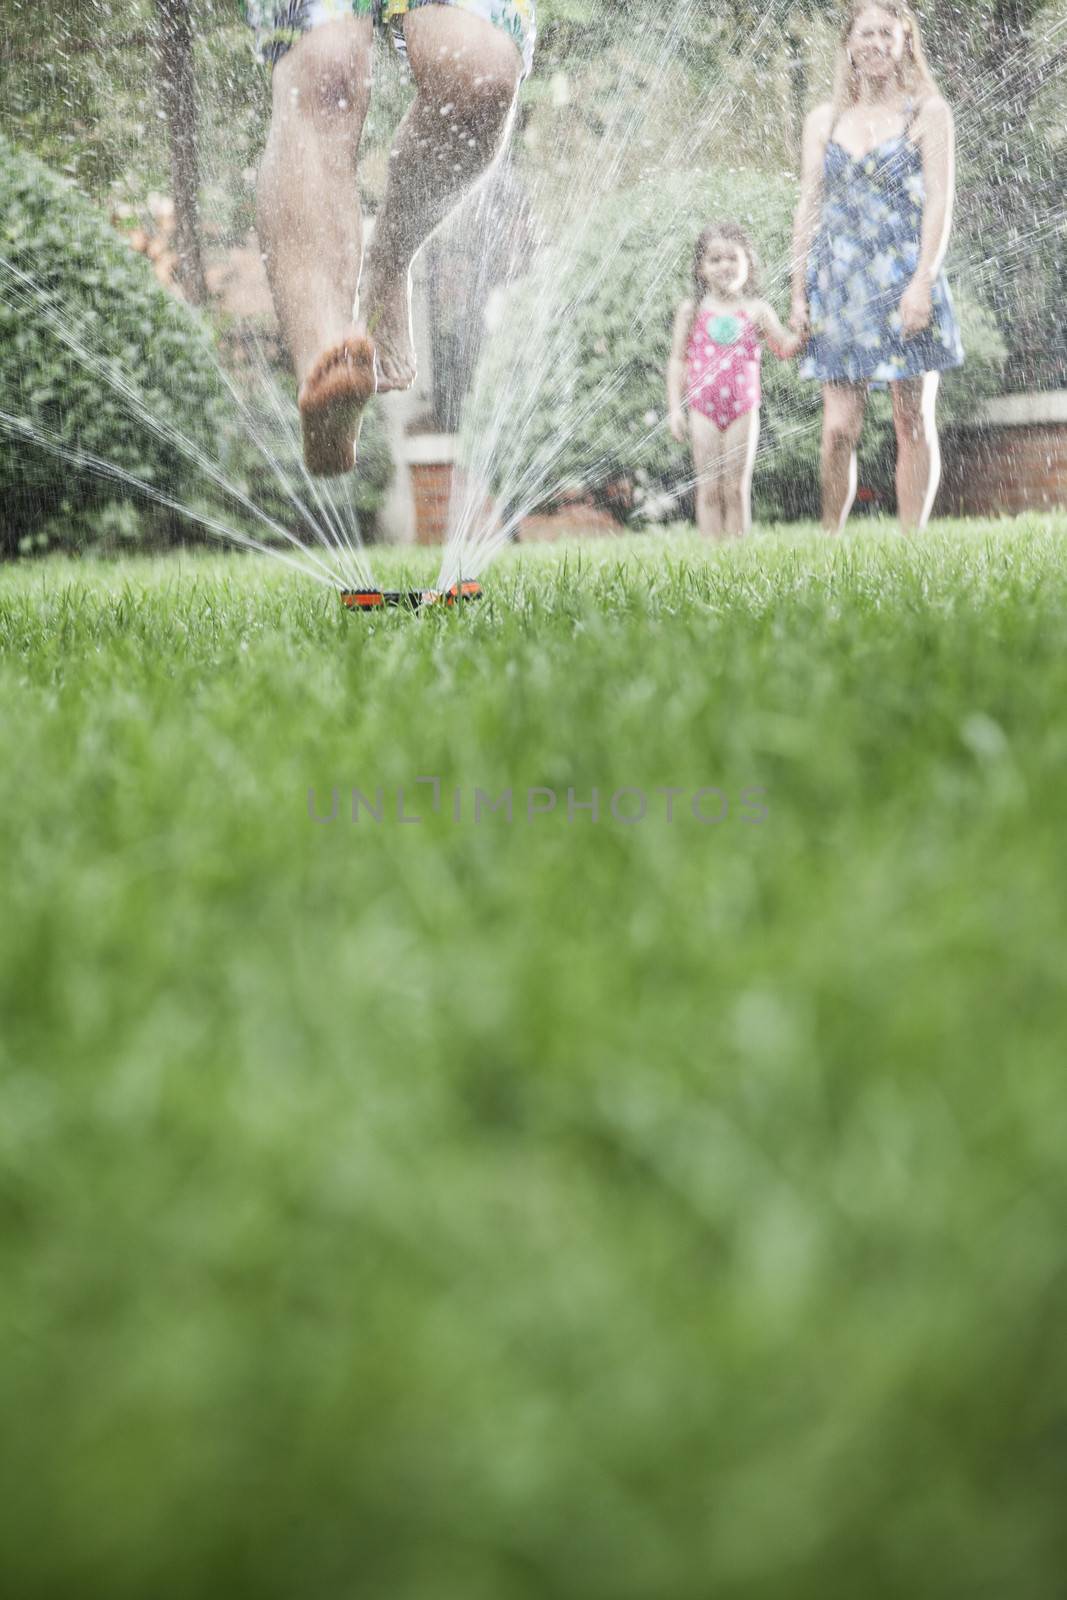 Surface level shot of father jumping through a sprinkler in the grass, mother and daughter watch in the background by XiXinXing